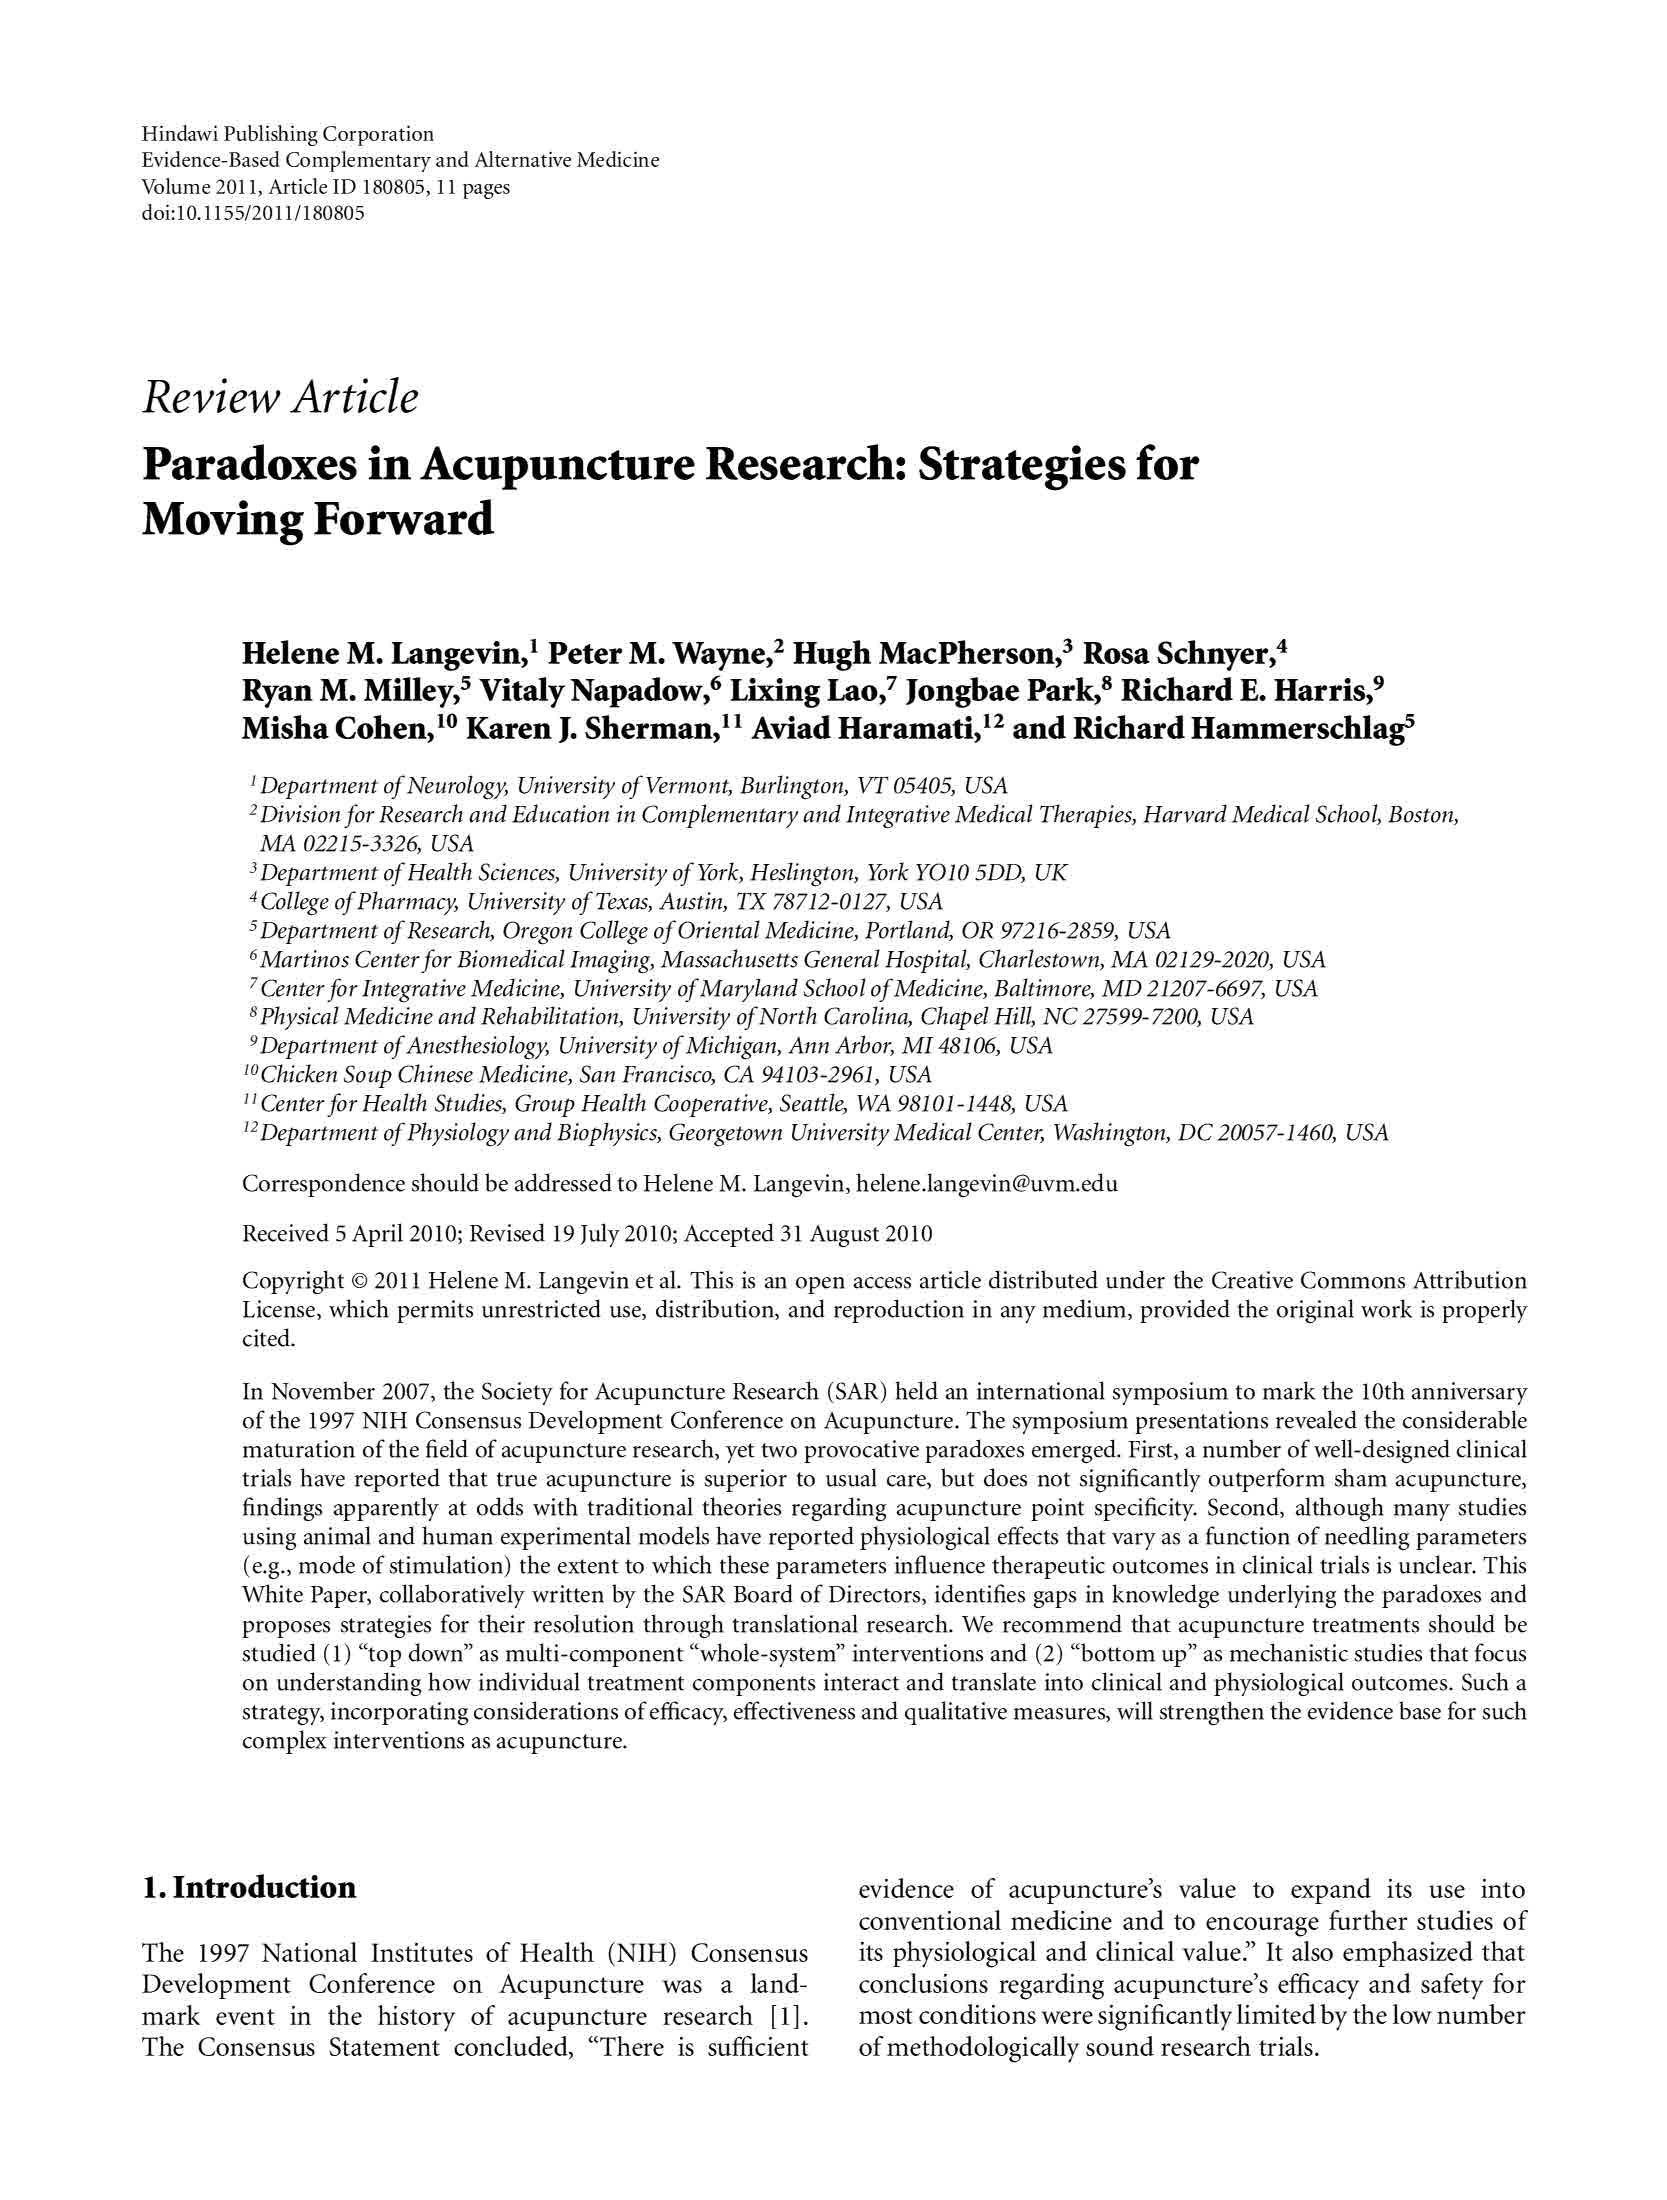 paradoxes in acupuncture research p1